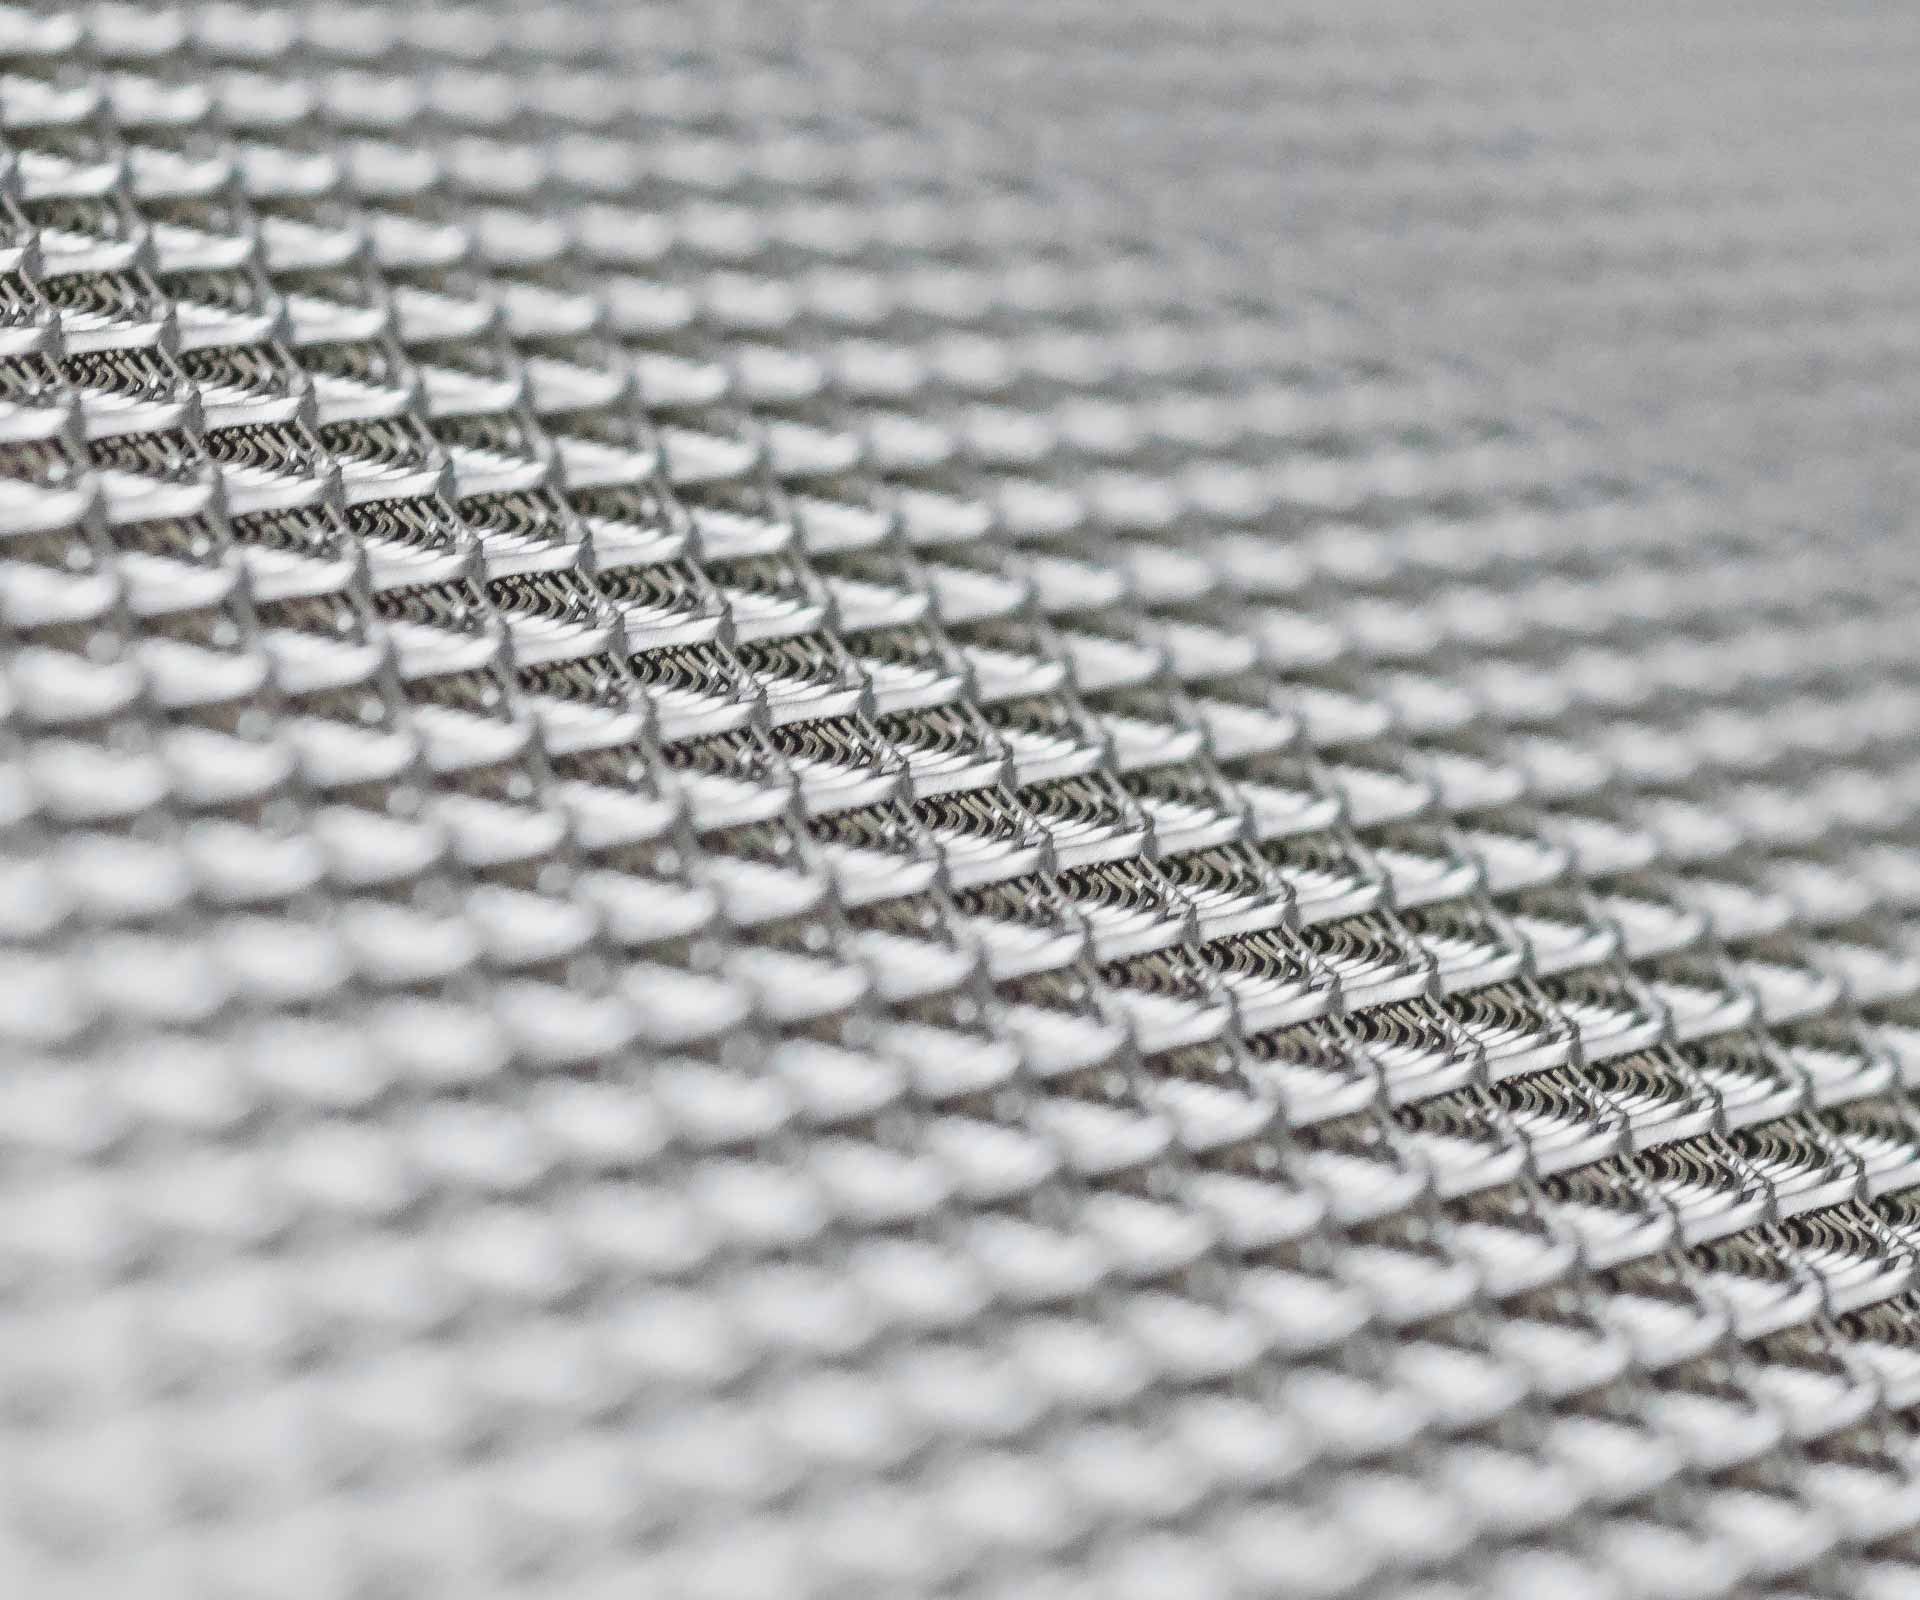 Decorative Mesh Perforated Mesh Expanded Aluminum Stainless Steel